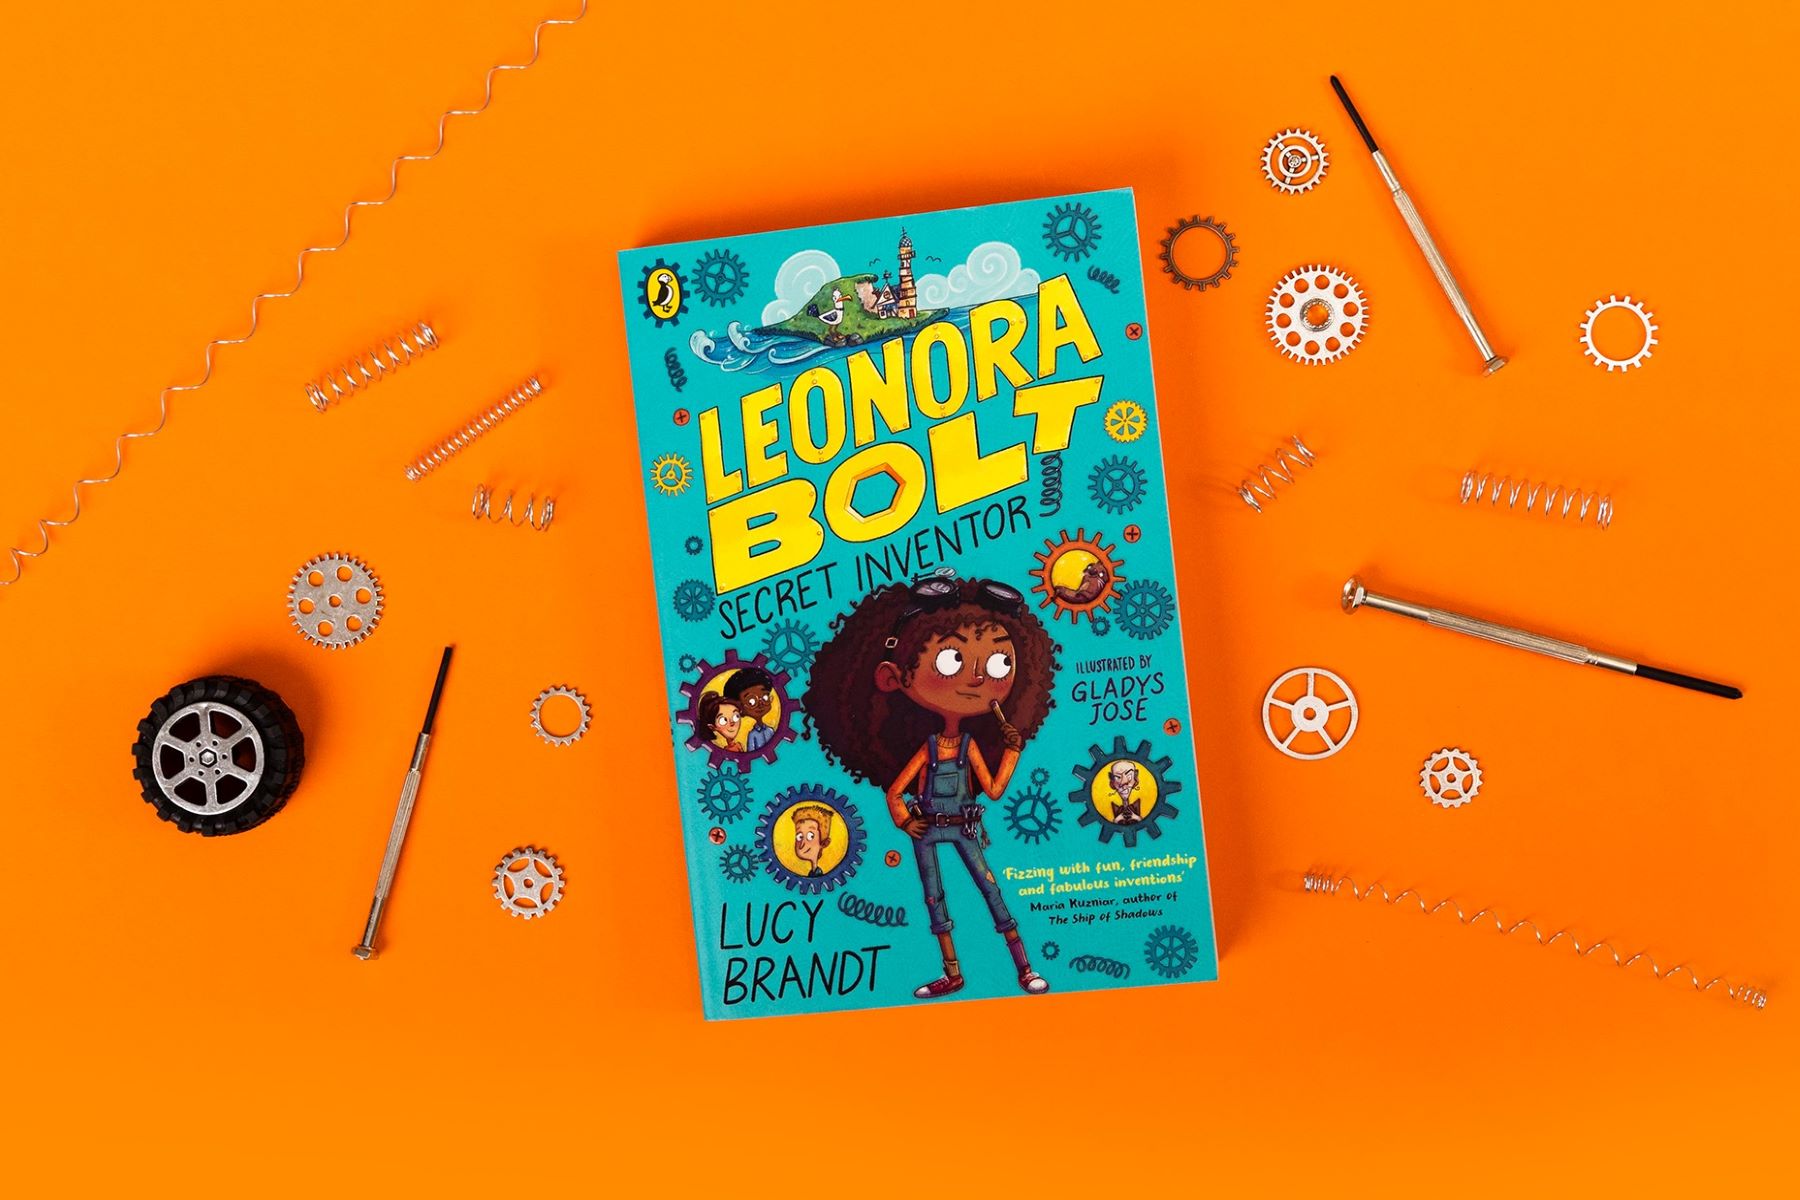 A photo of a copy of Leonora Bolt: Secret Inventor on a bright orange background with tools and cogs surrounding the book